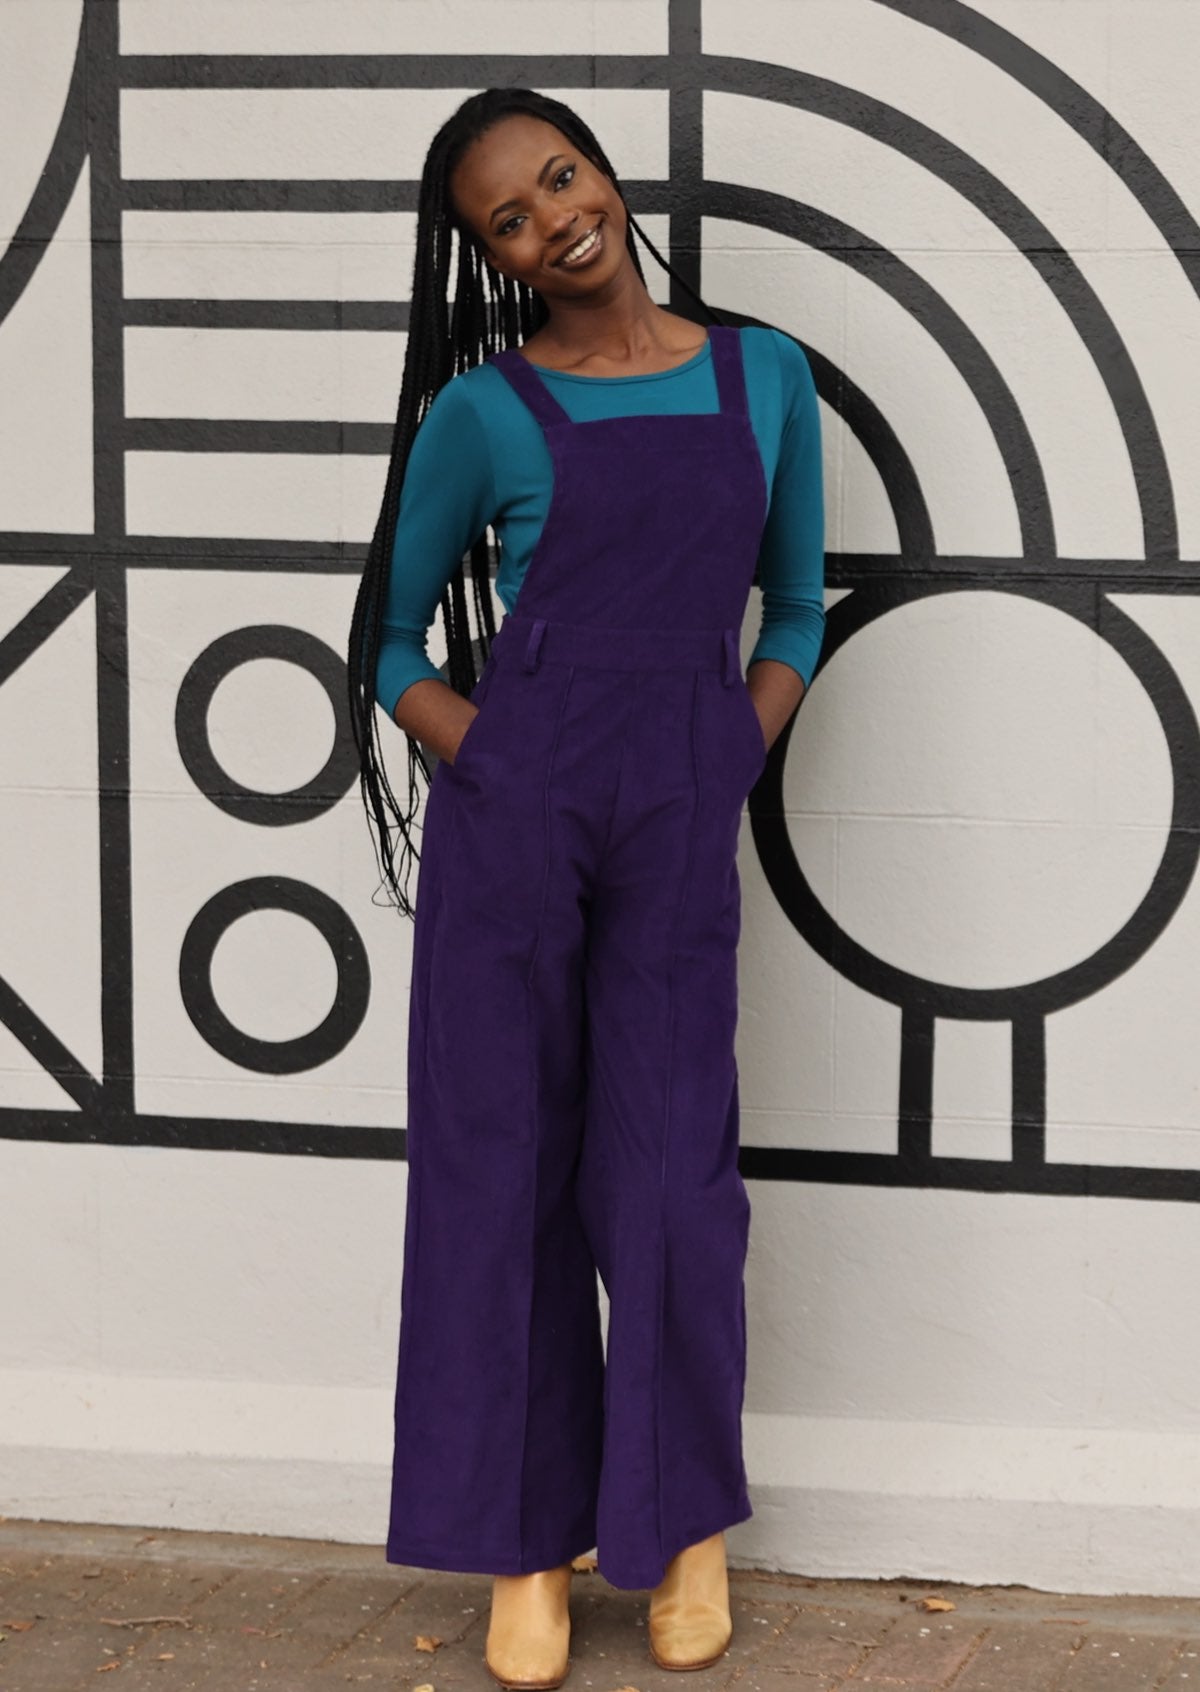 model wearing purple cotton corduroy overalls with hands in pockets in front of mural